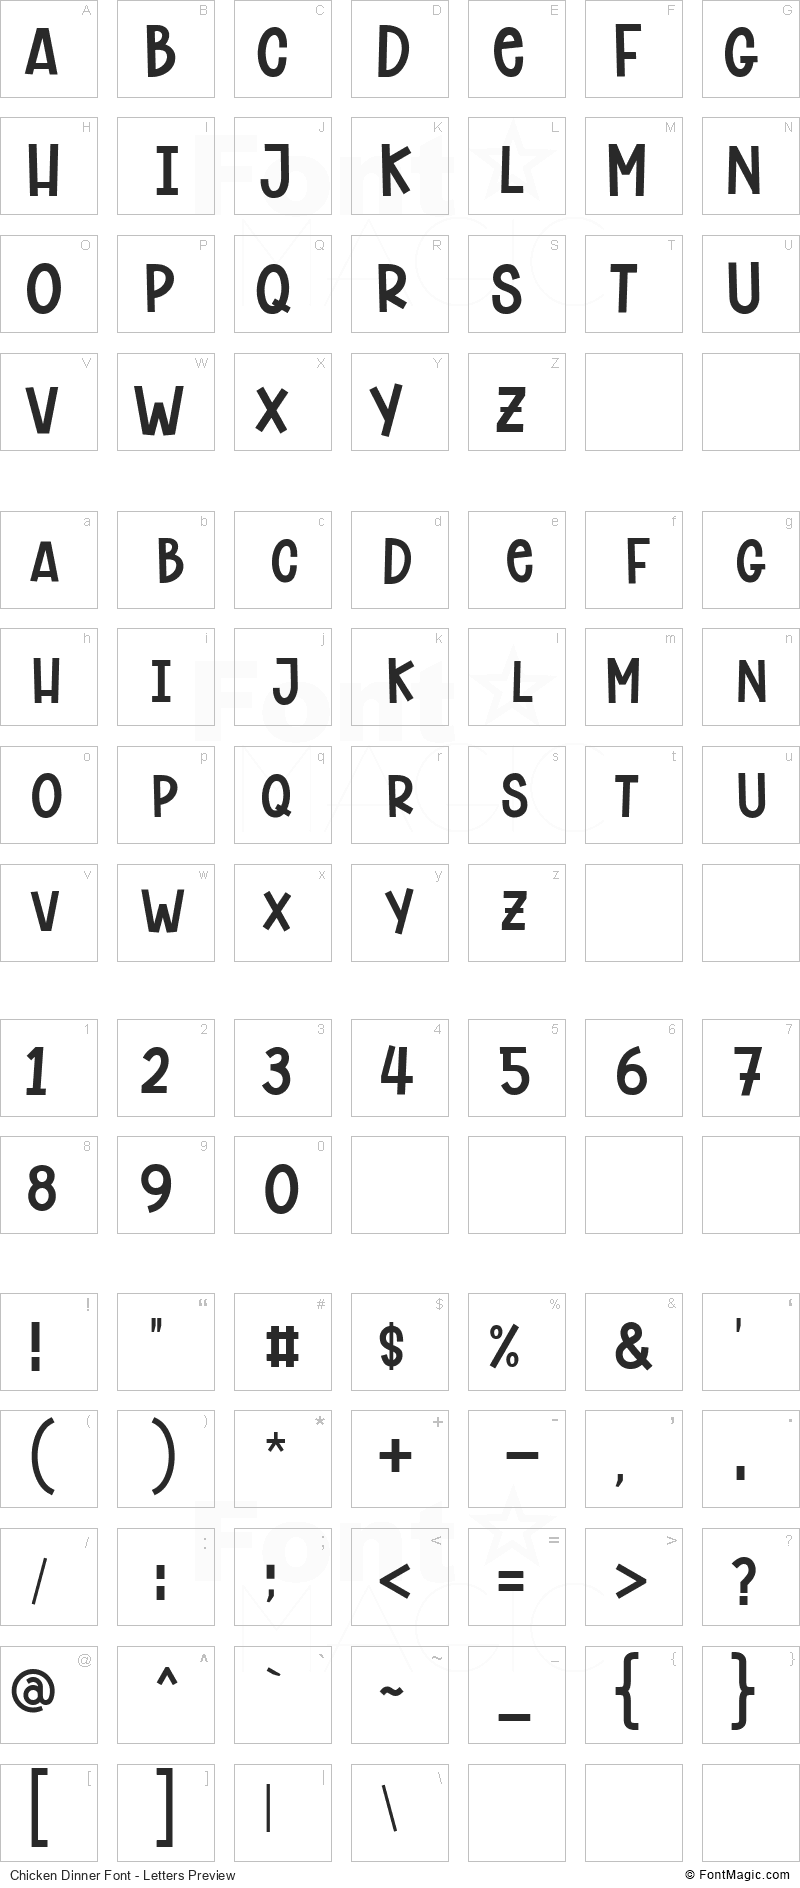 Chicken Dinner Font - All Latters Preview Chart